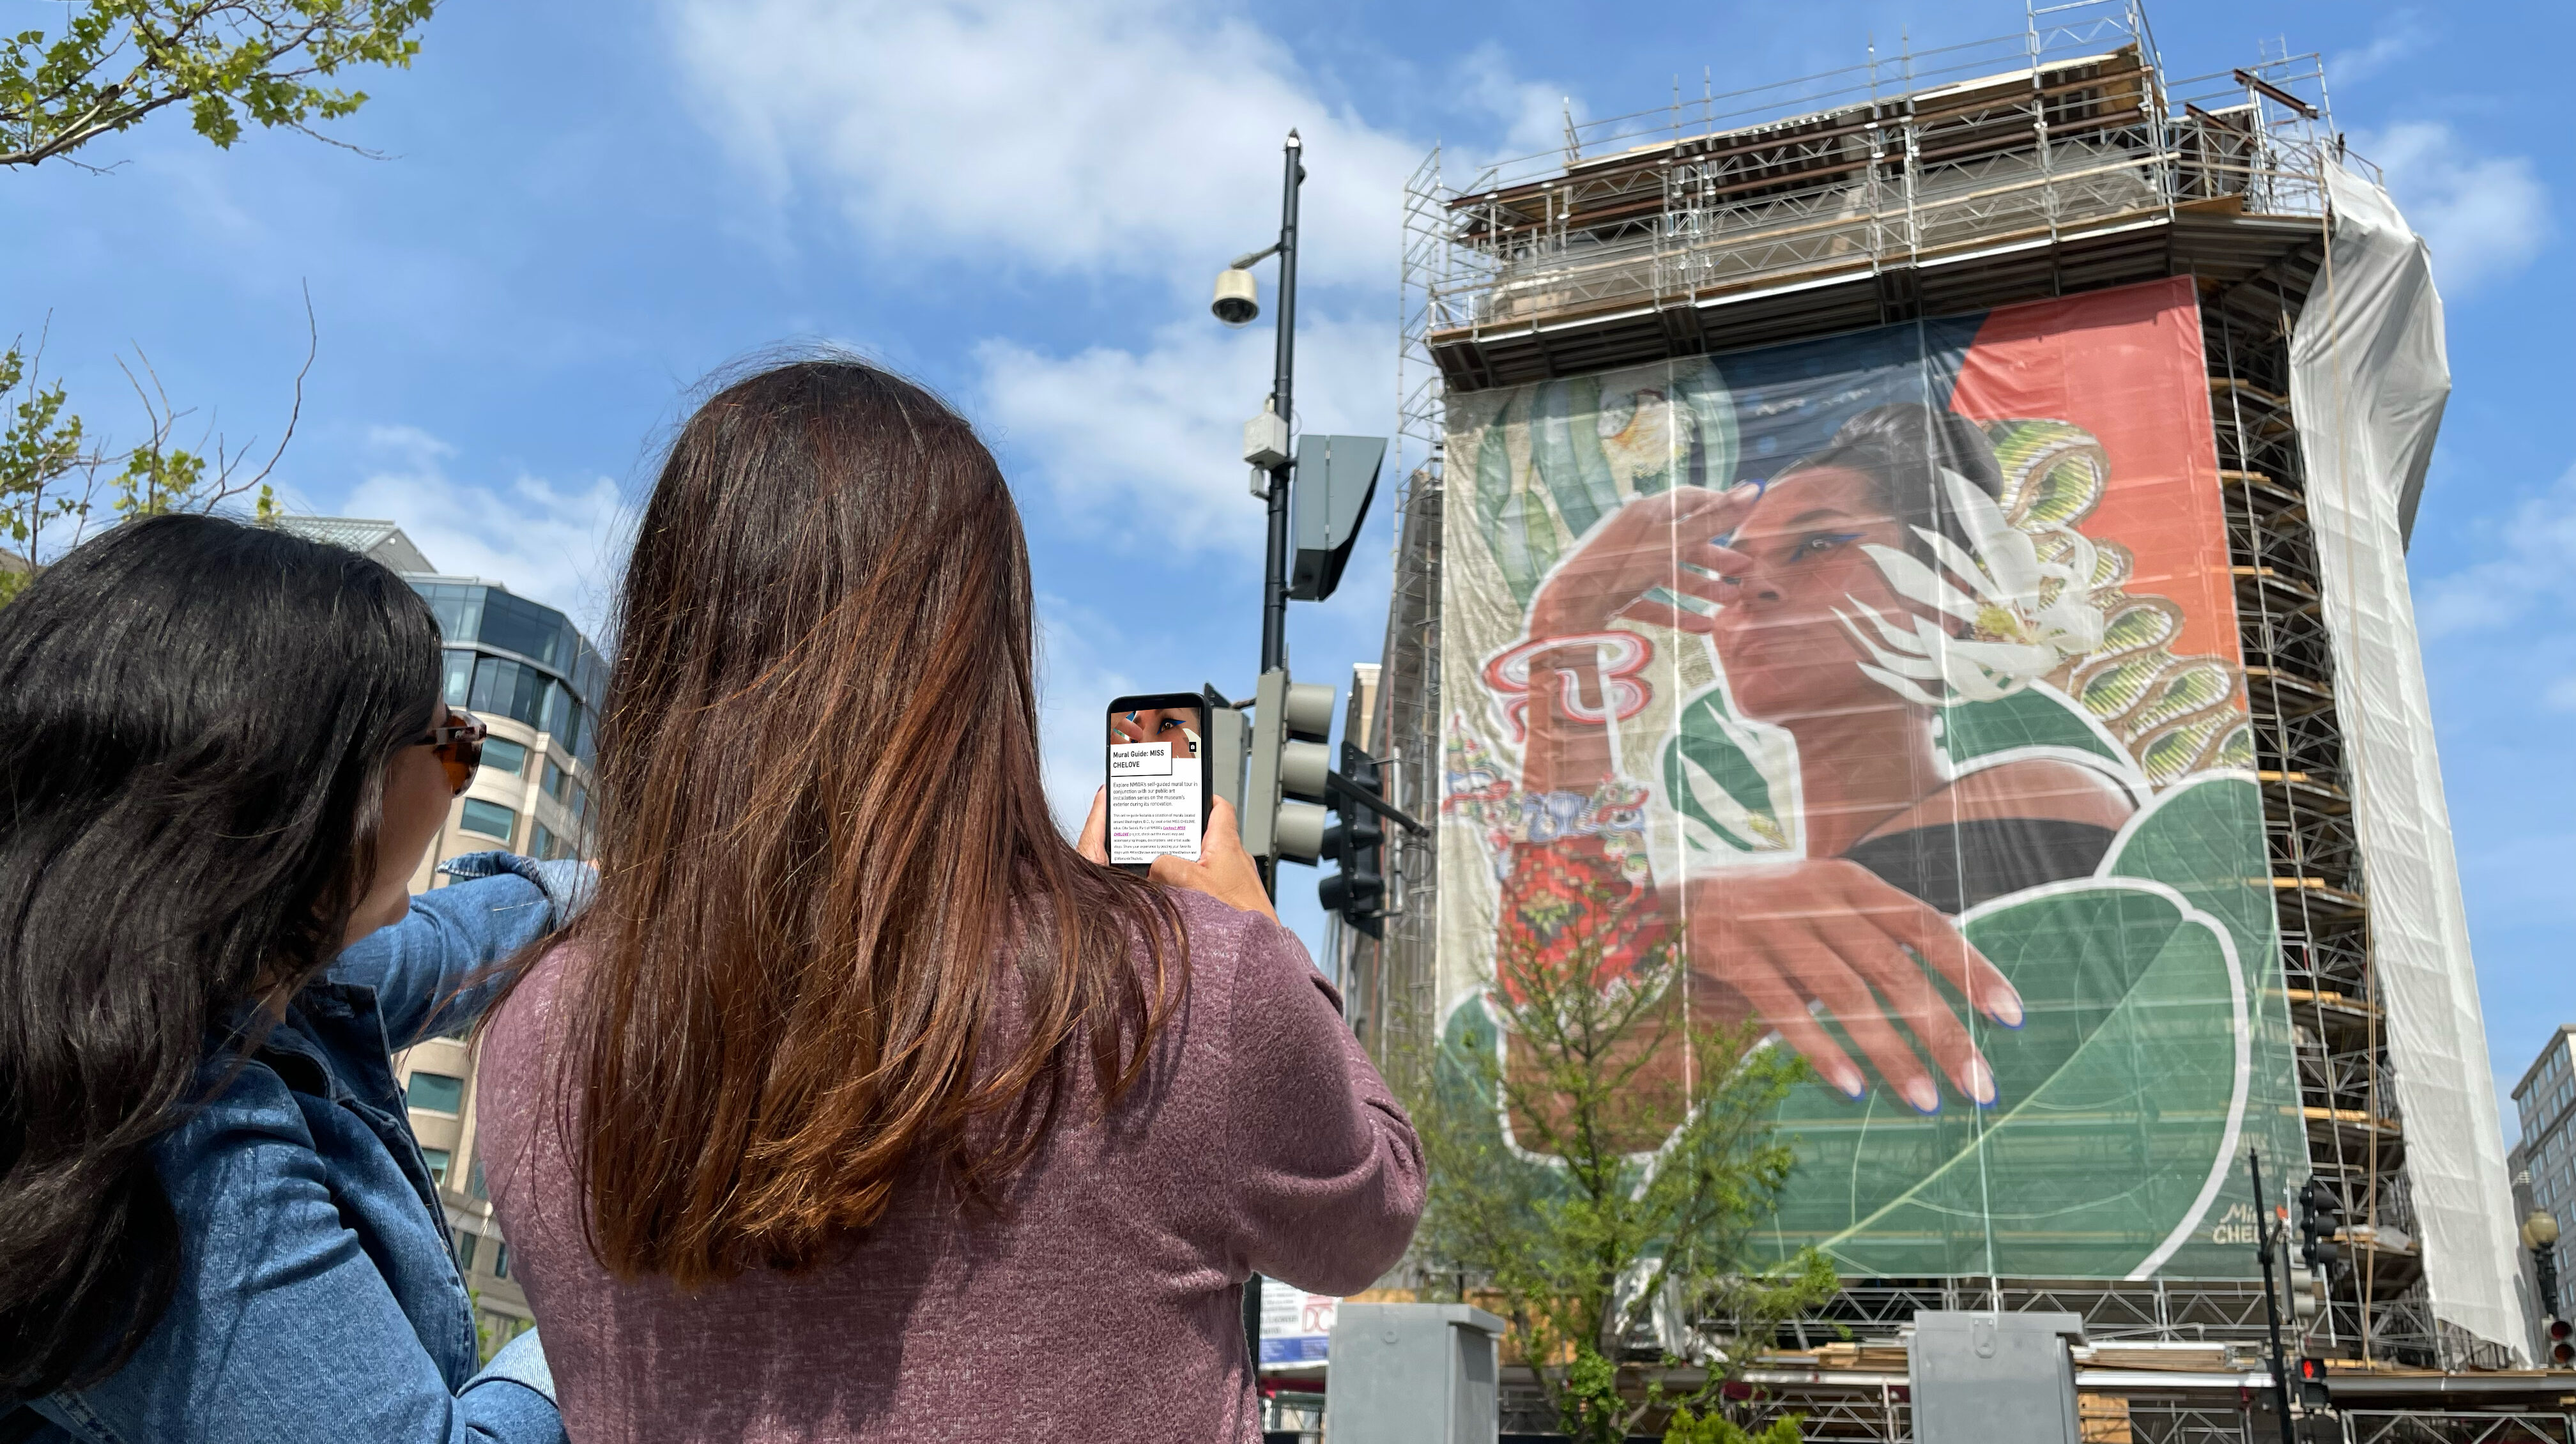 Two women with medium skin tone and long brown hair use their cell phone to look at the online mural guide while looking at the large mural on the museum's building exterior.